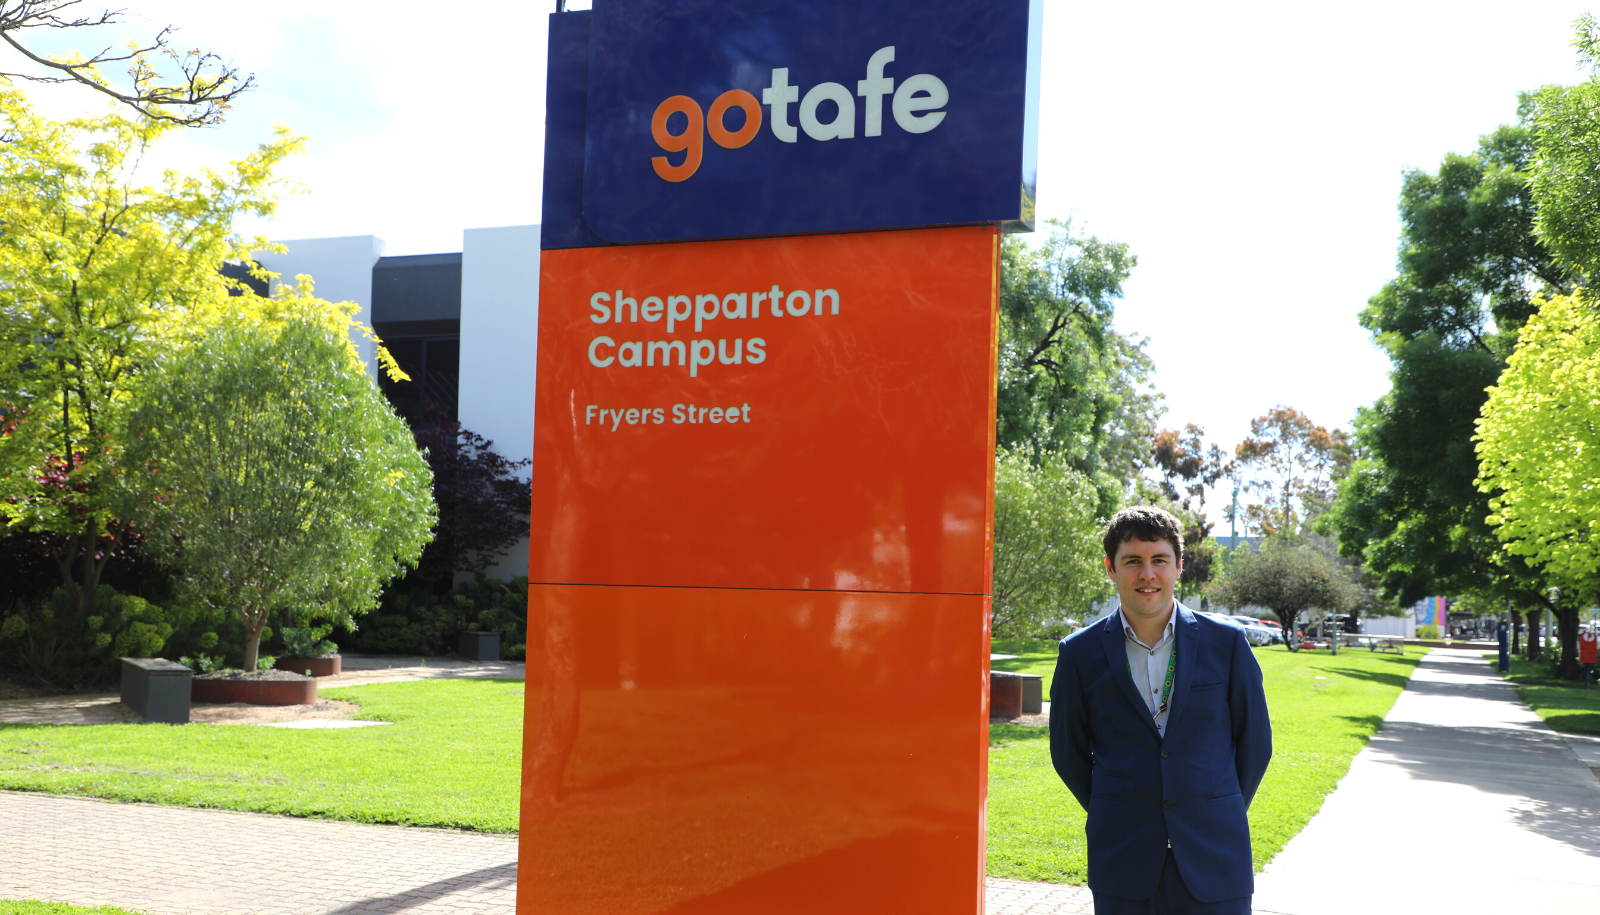 Daniel Gardner, Coordinator for Diversity and Inclusion at GOTAFE, standing next to the institution’s Shepparton Campus Fryers Street sign